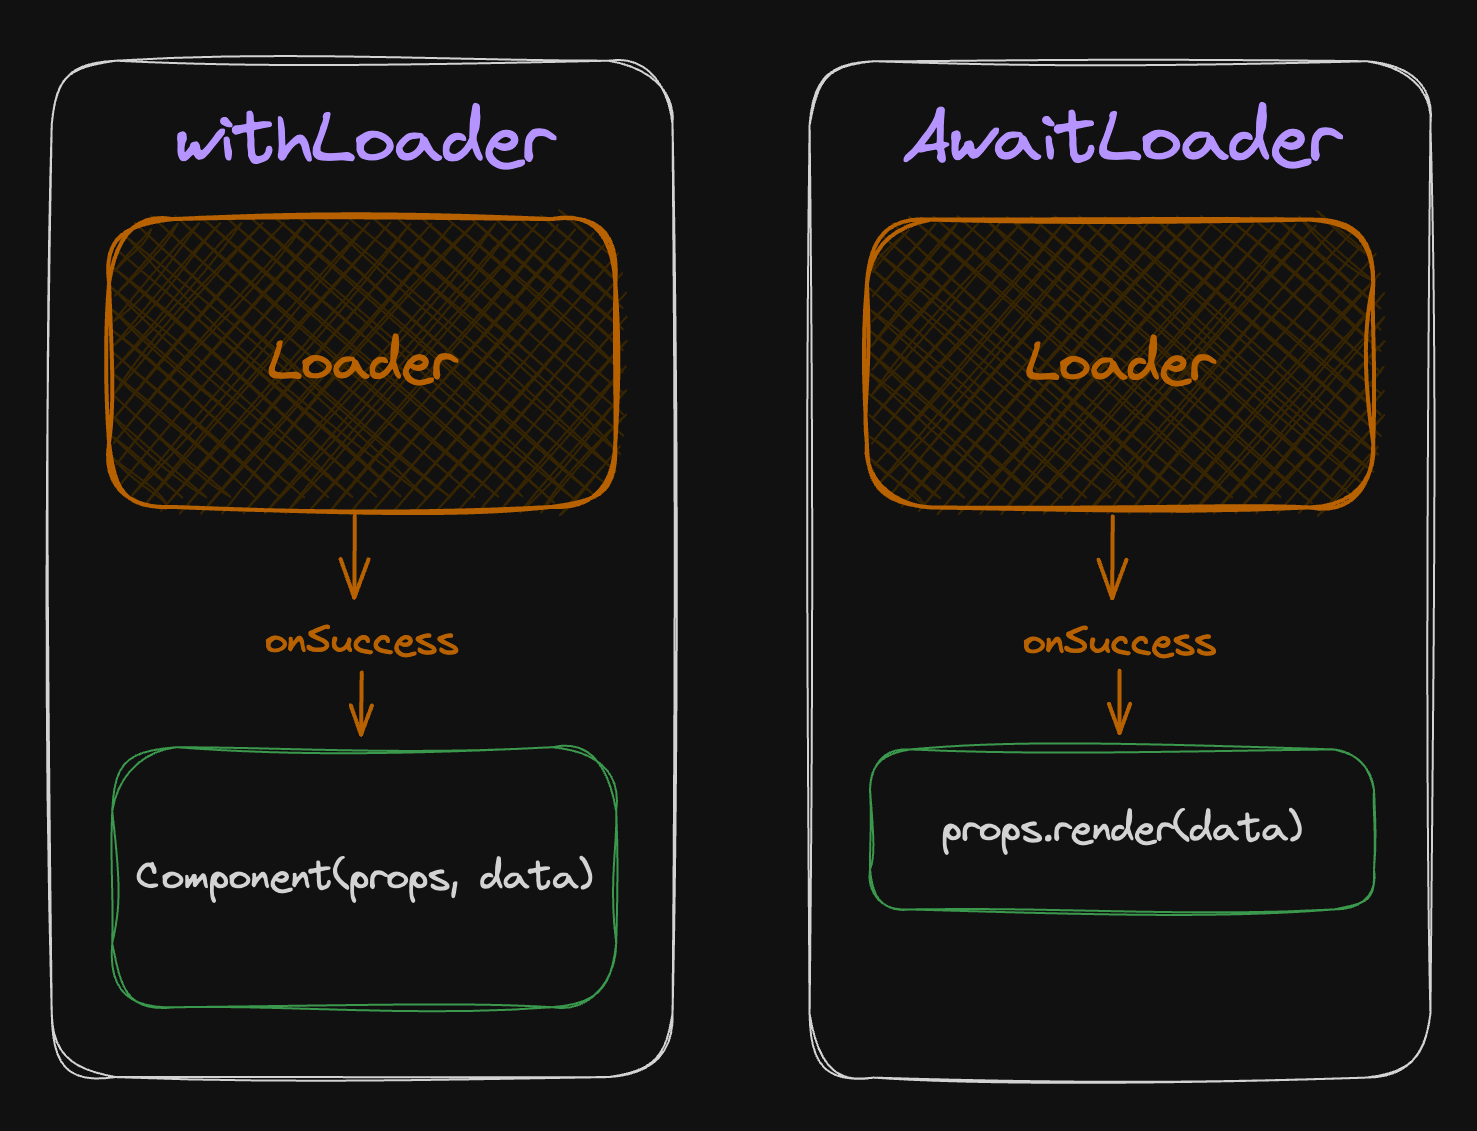 Chart showing differences between AwaitLoader and withLoader